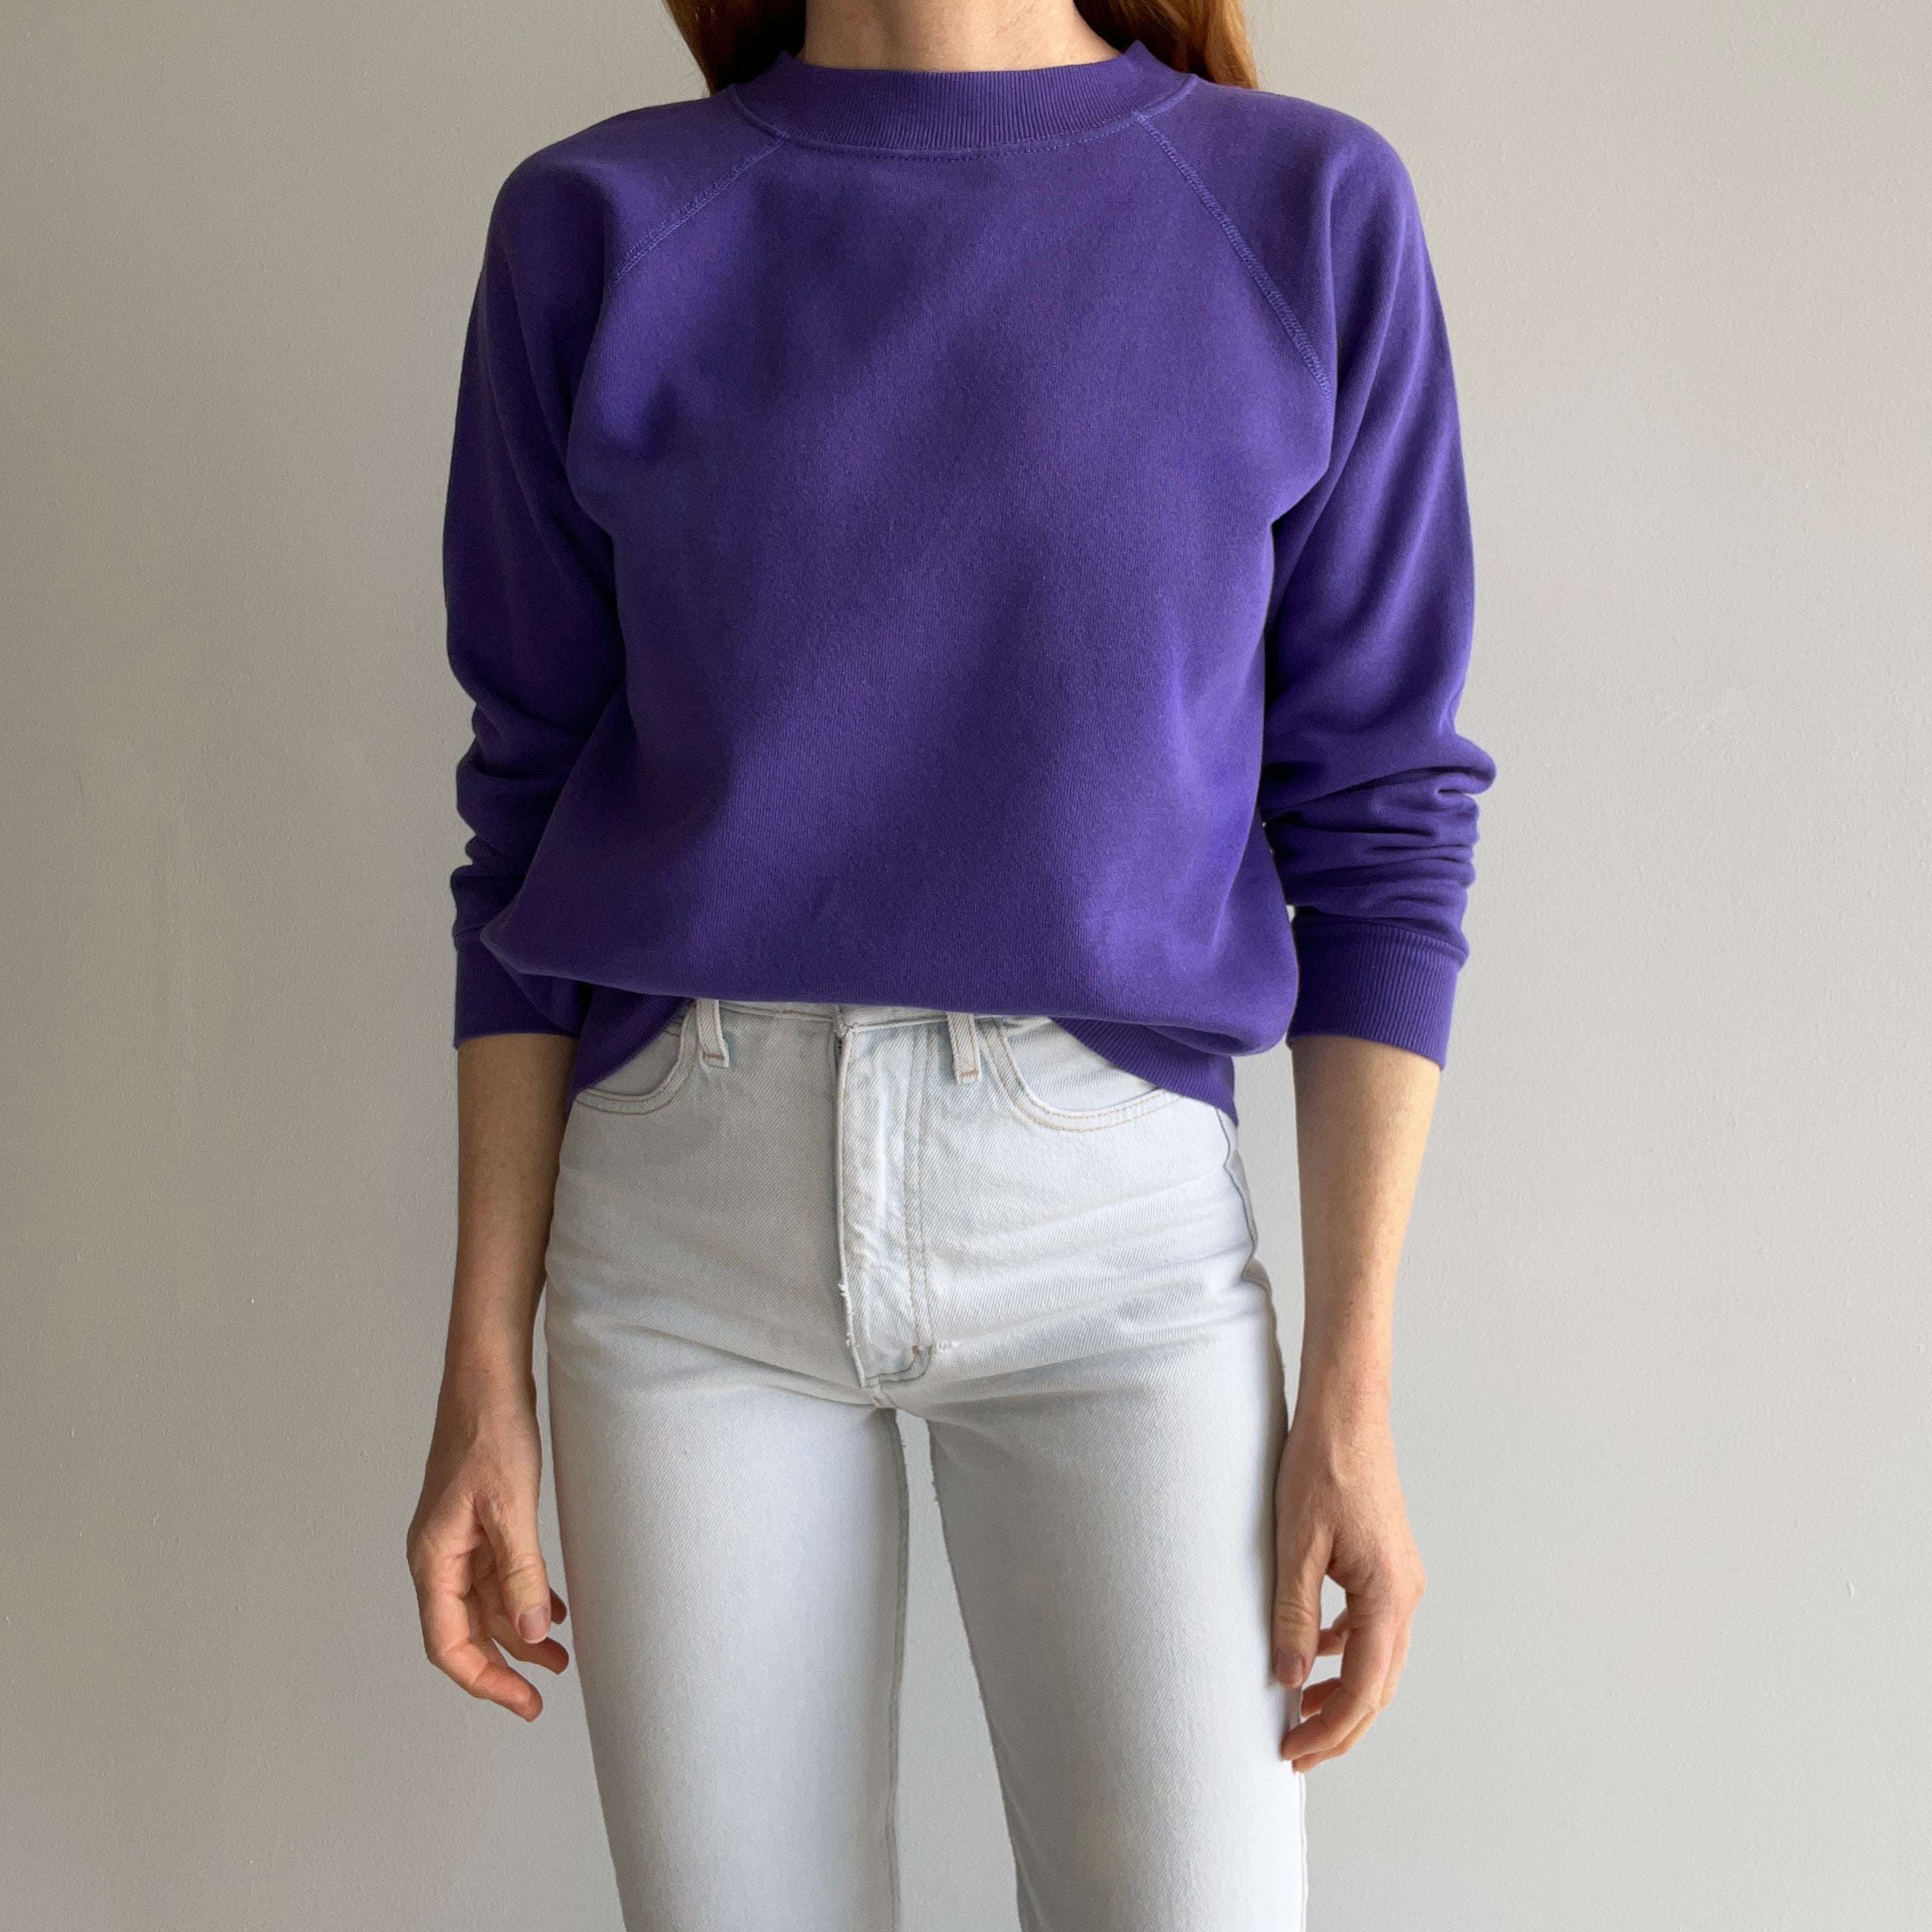 1980s Sweetest HHW Amethyst Purple Sweatshirt with Hand Stitched Initials 